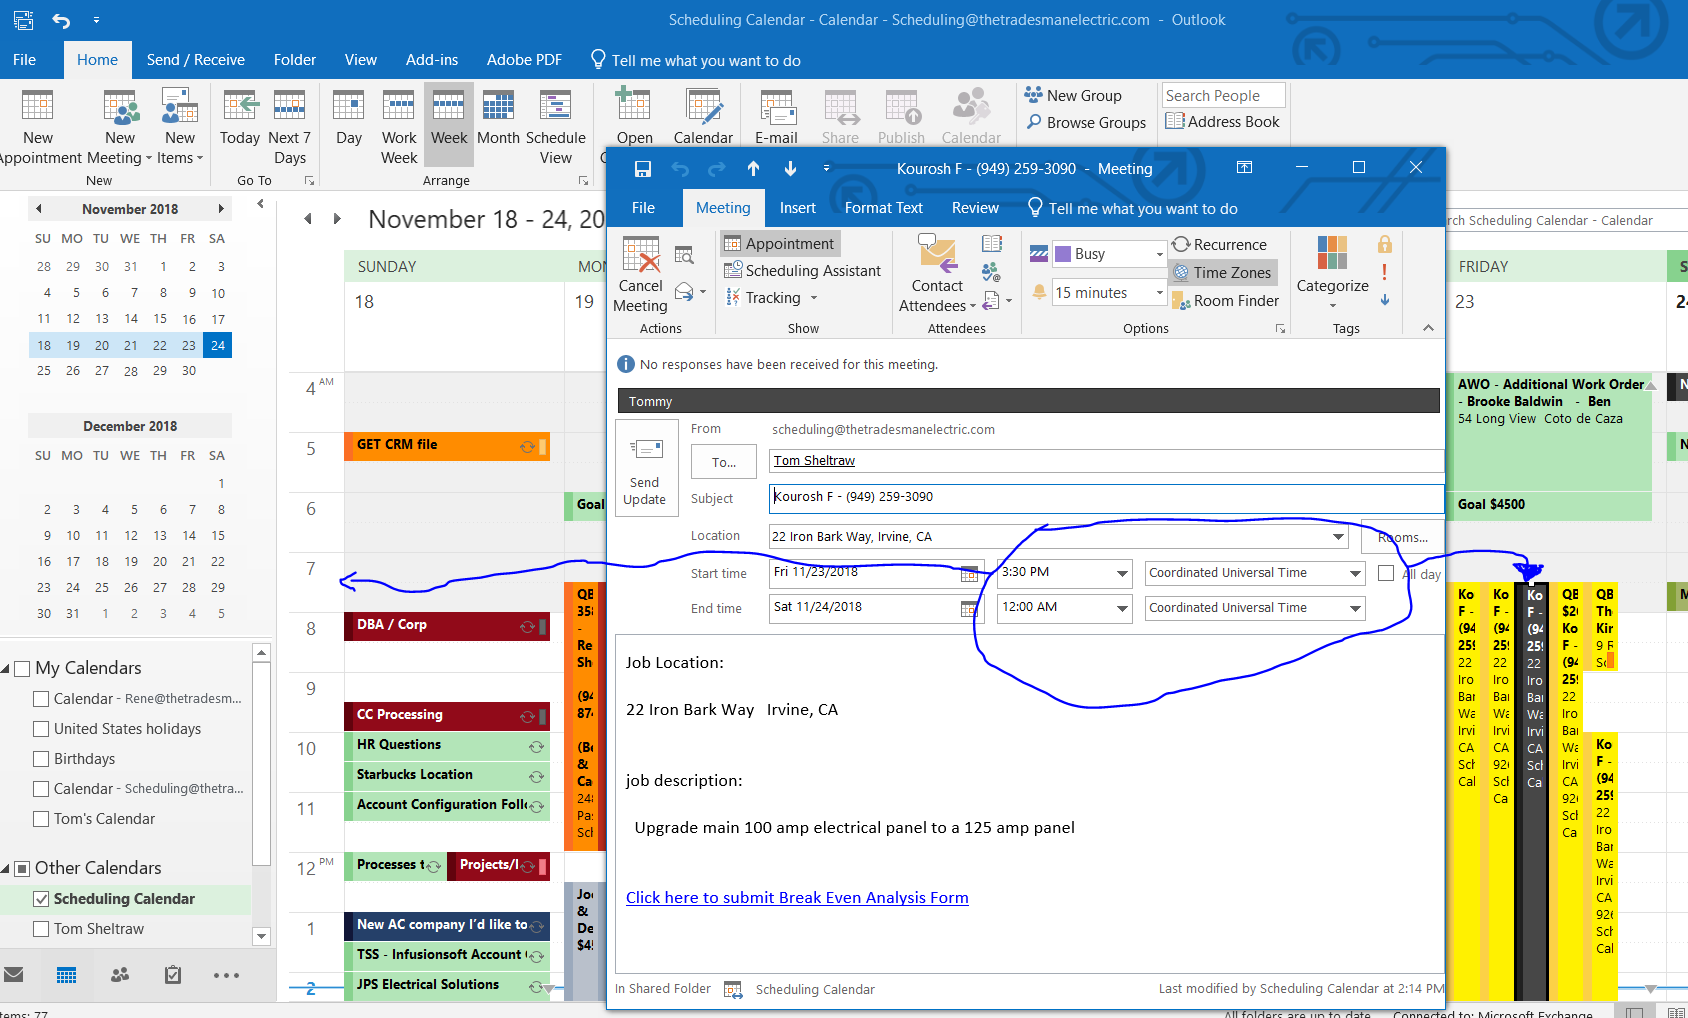 Outlook Calendar shows wrong time zone when editing events and Invites